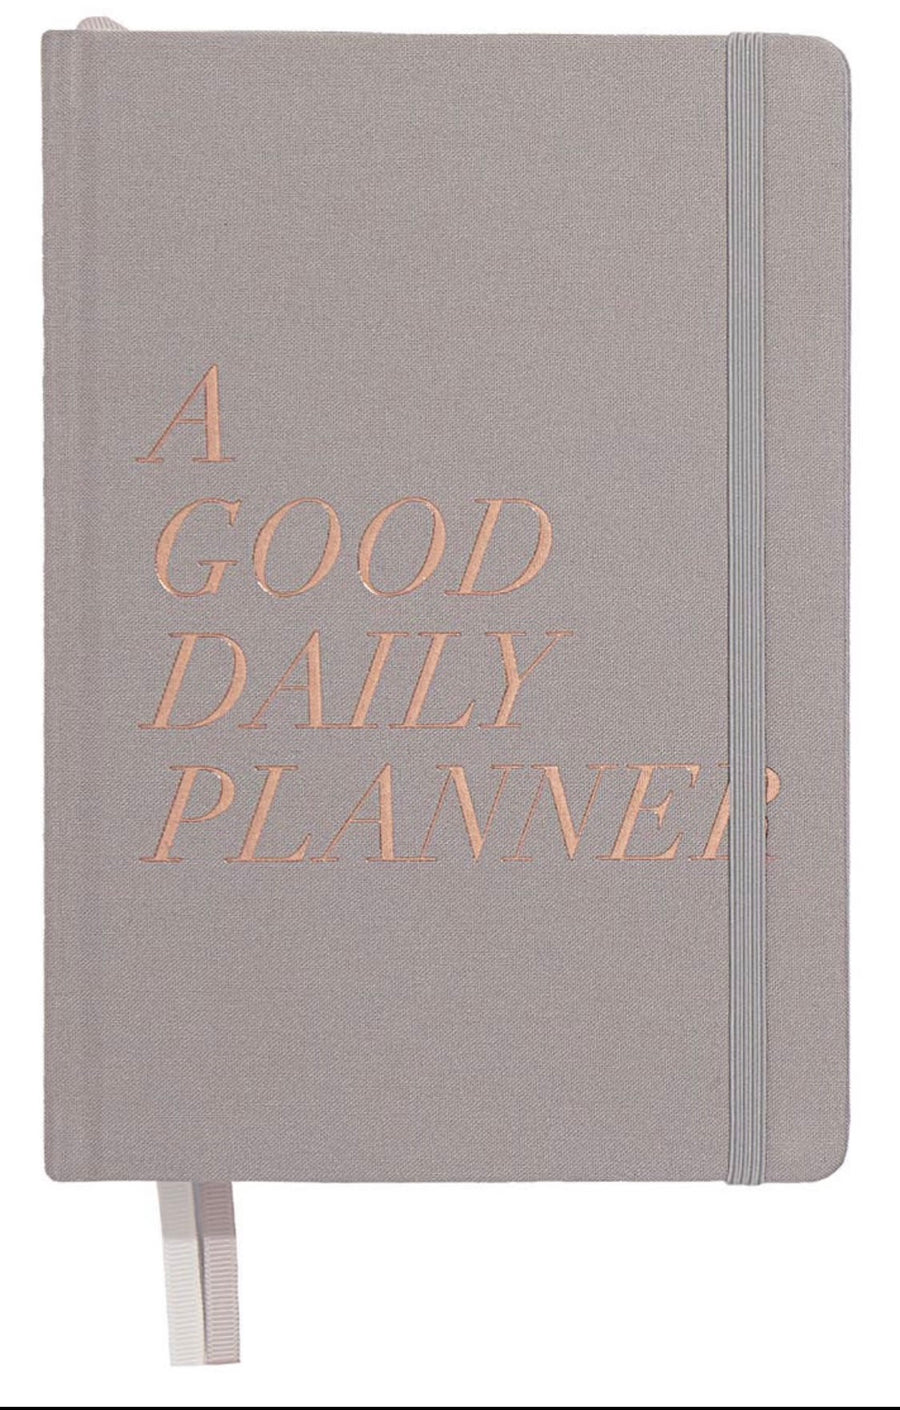 A Good Daily Planner